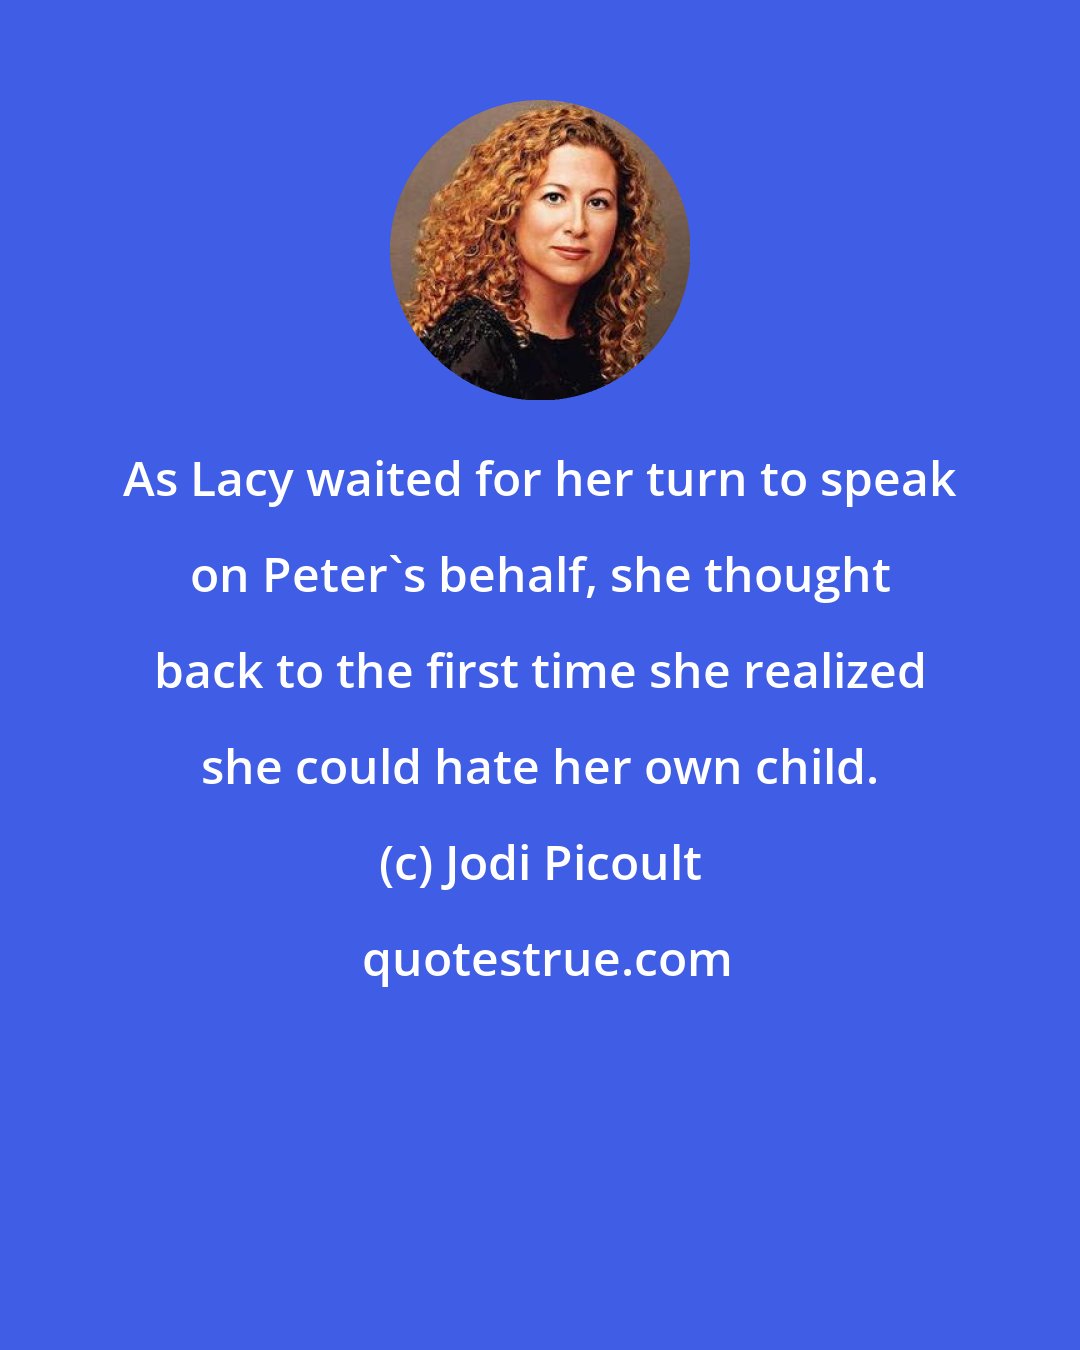 Jodi Picoult: As Lacy waited for her turn to speak on Peter's behalf, she thought back to the first time she realized she could hate her own child.